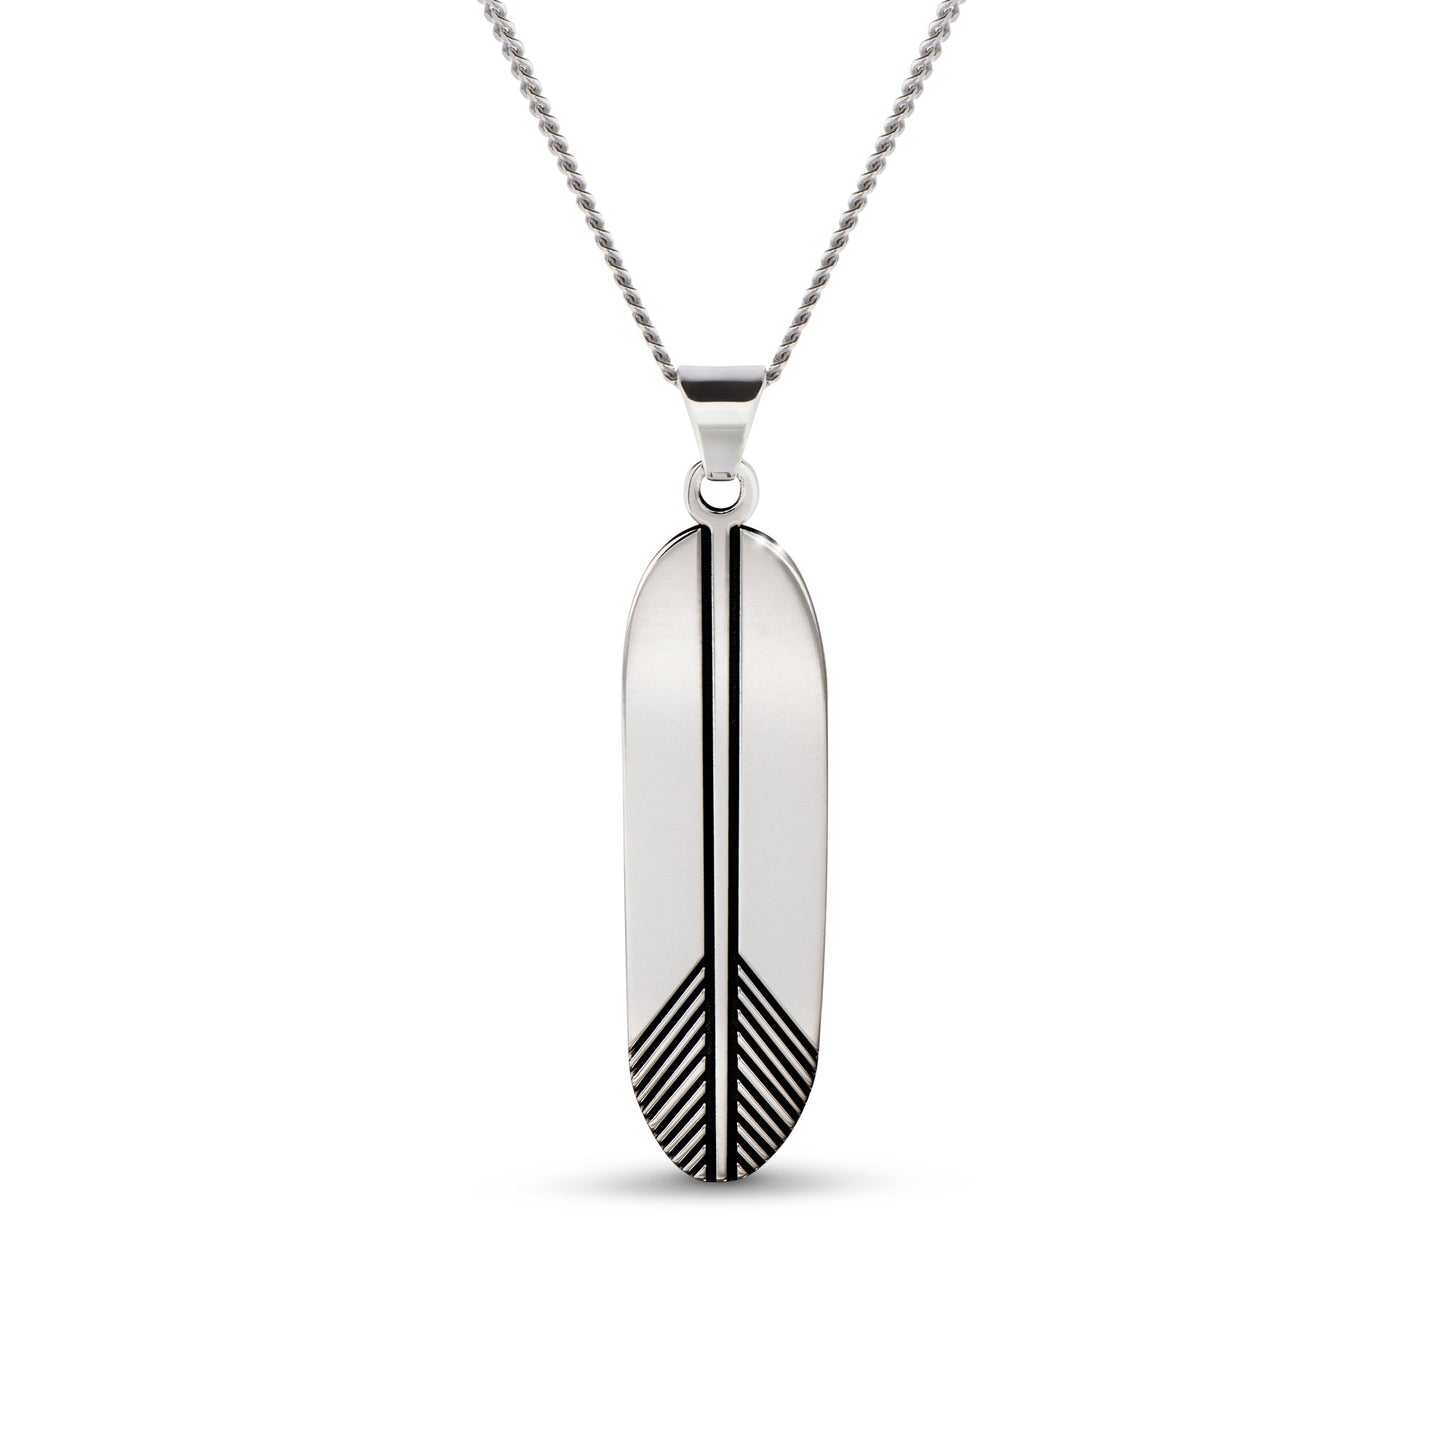 FEATHER NECKLACE Spiritual Journey + Honour